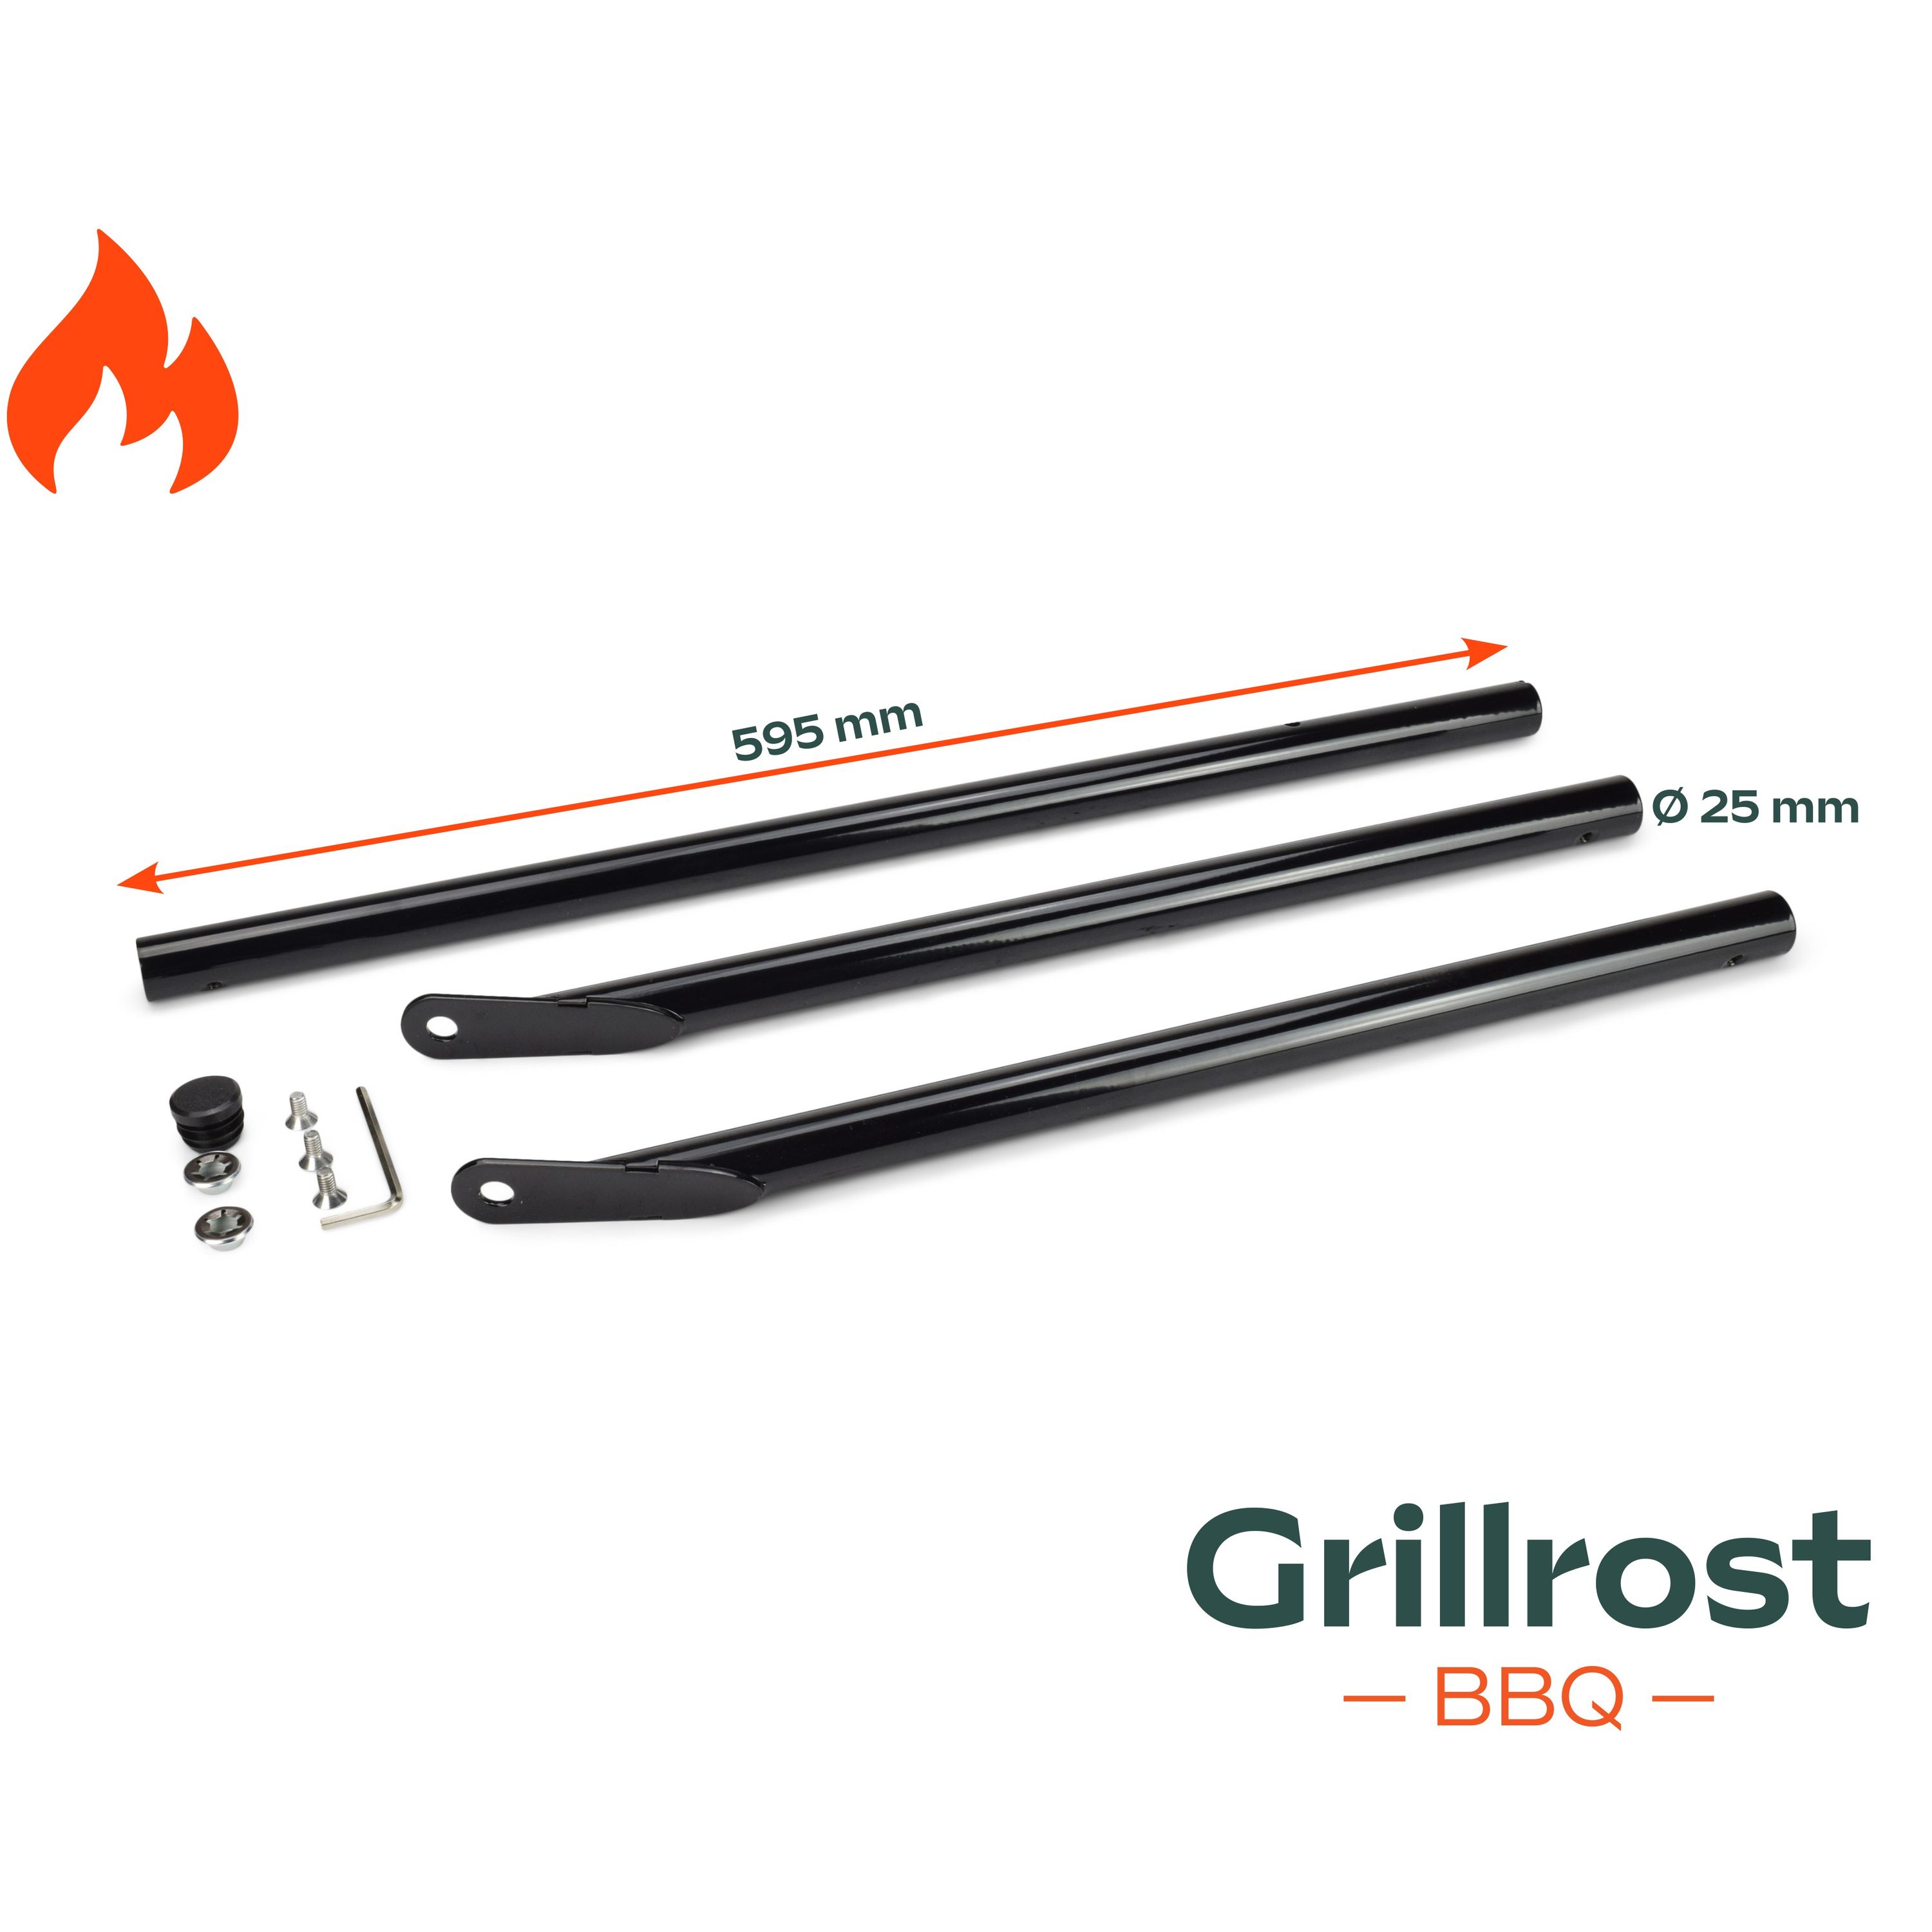 Stainless steel kettle grill legs for the 47 / 57 / 67 kettle grill